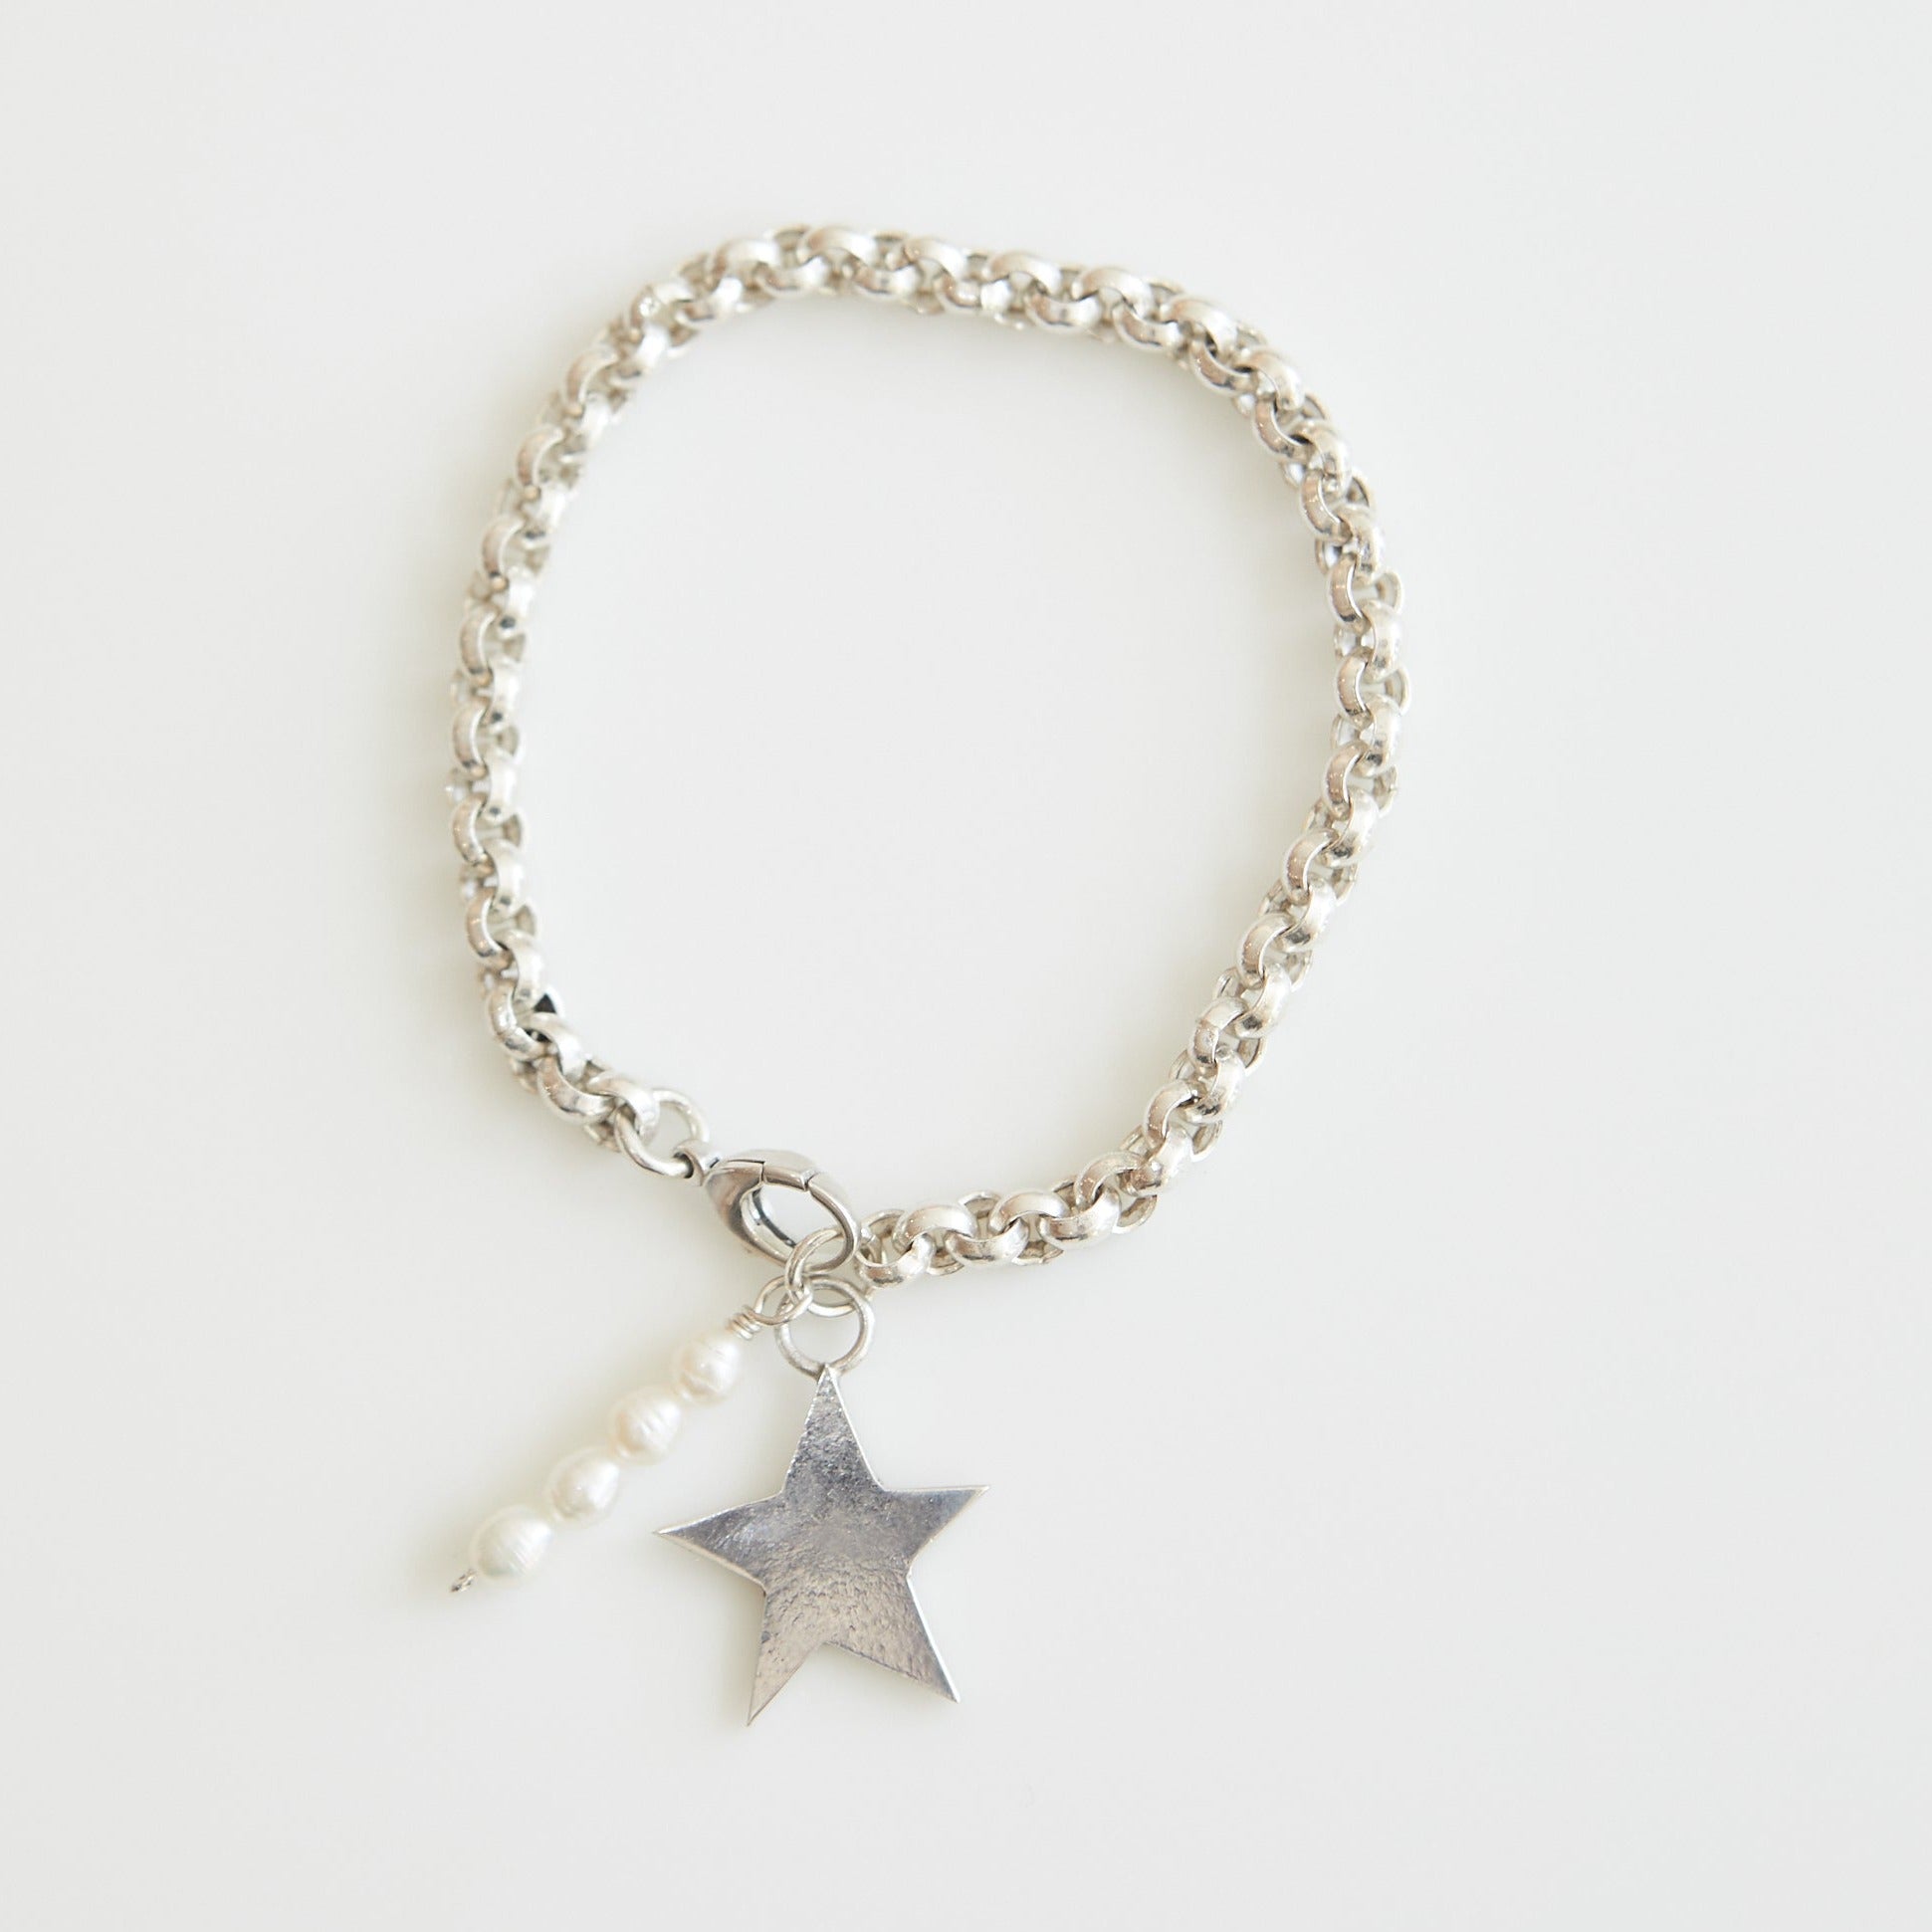 Shine Silver Star and Pearl Bracelet